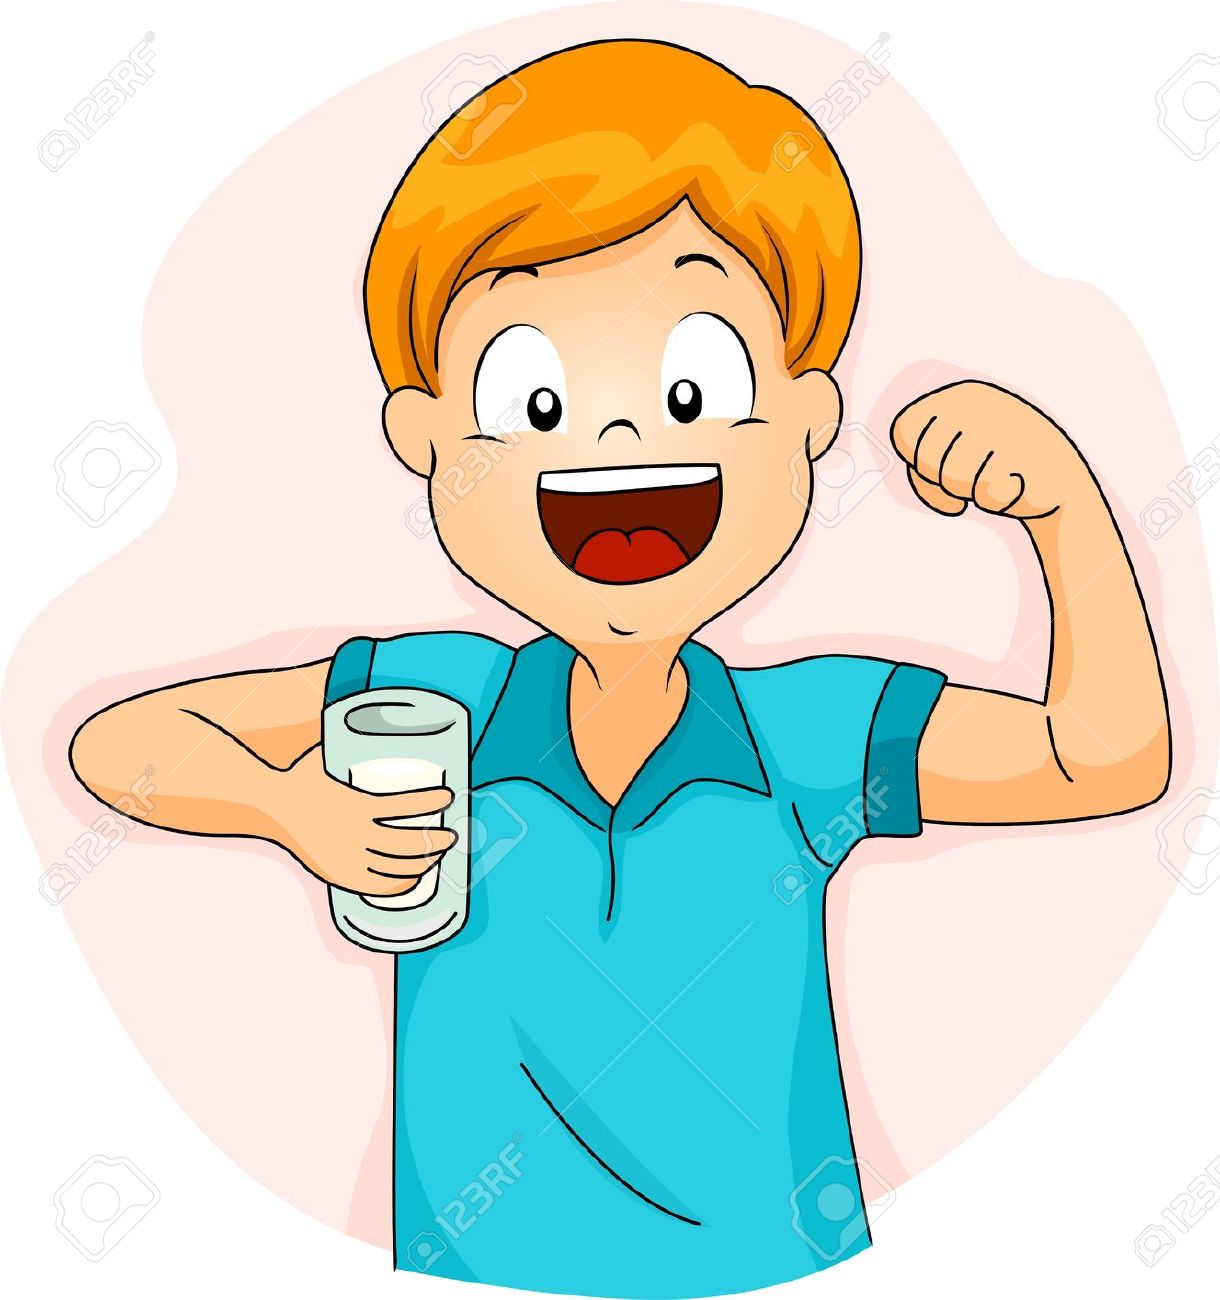 Drinking milk clipart clipart images gallery for free